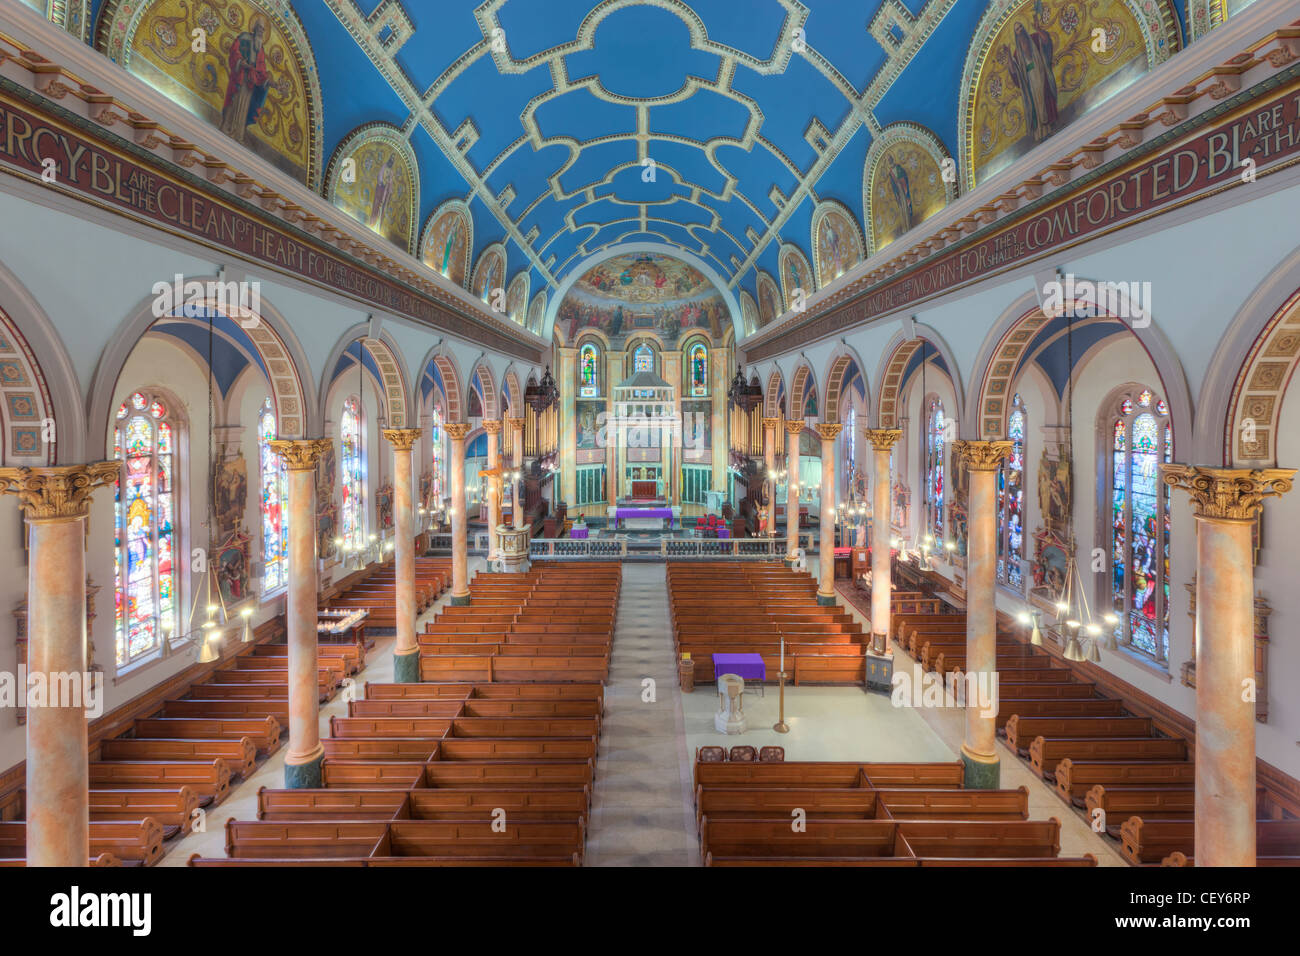 The beautiful interior of St. Michael's Church, one of the churches in the  Parish of the Resurrection, in Jersey City, NJ Stock Photo - Alamy